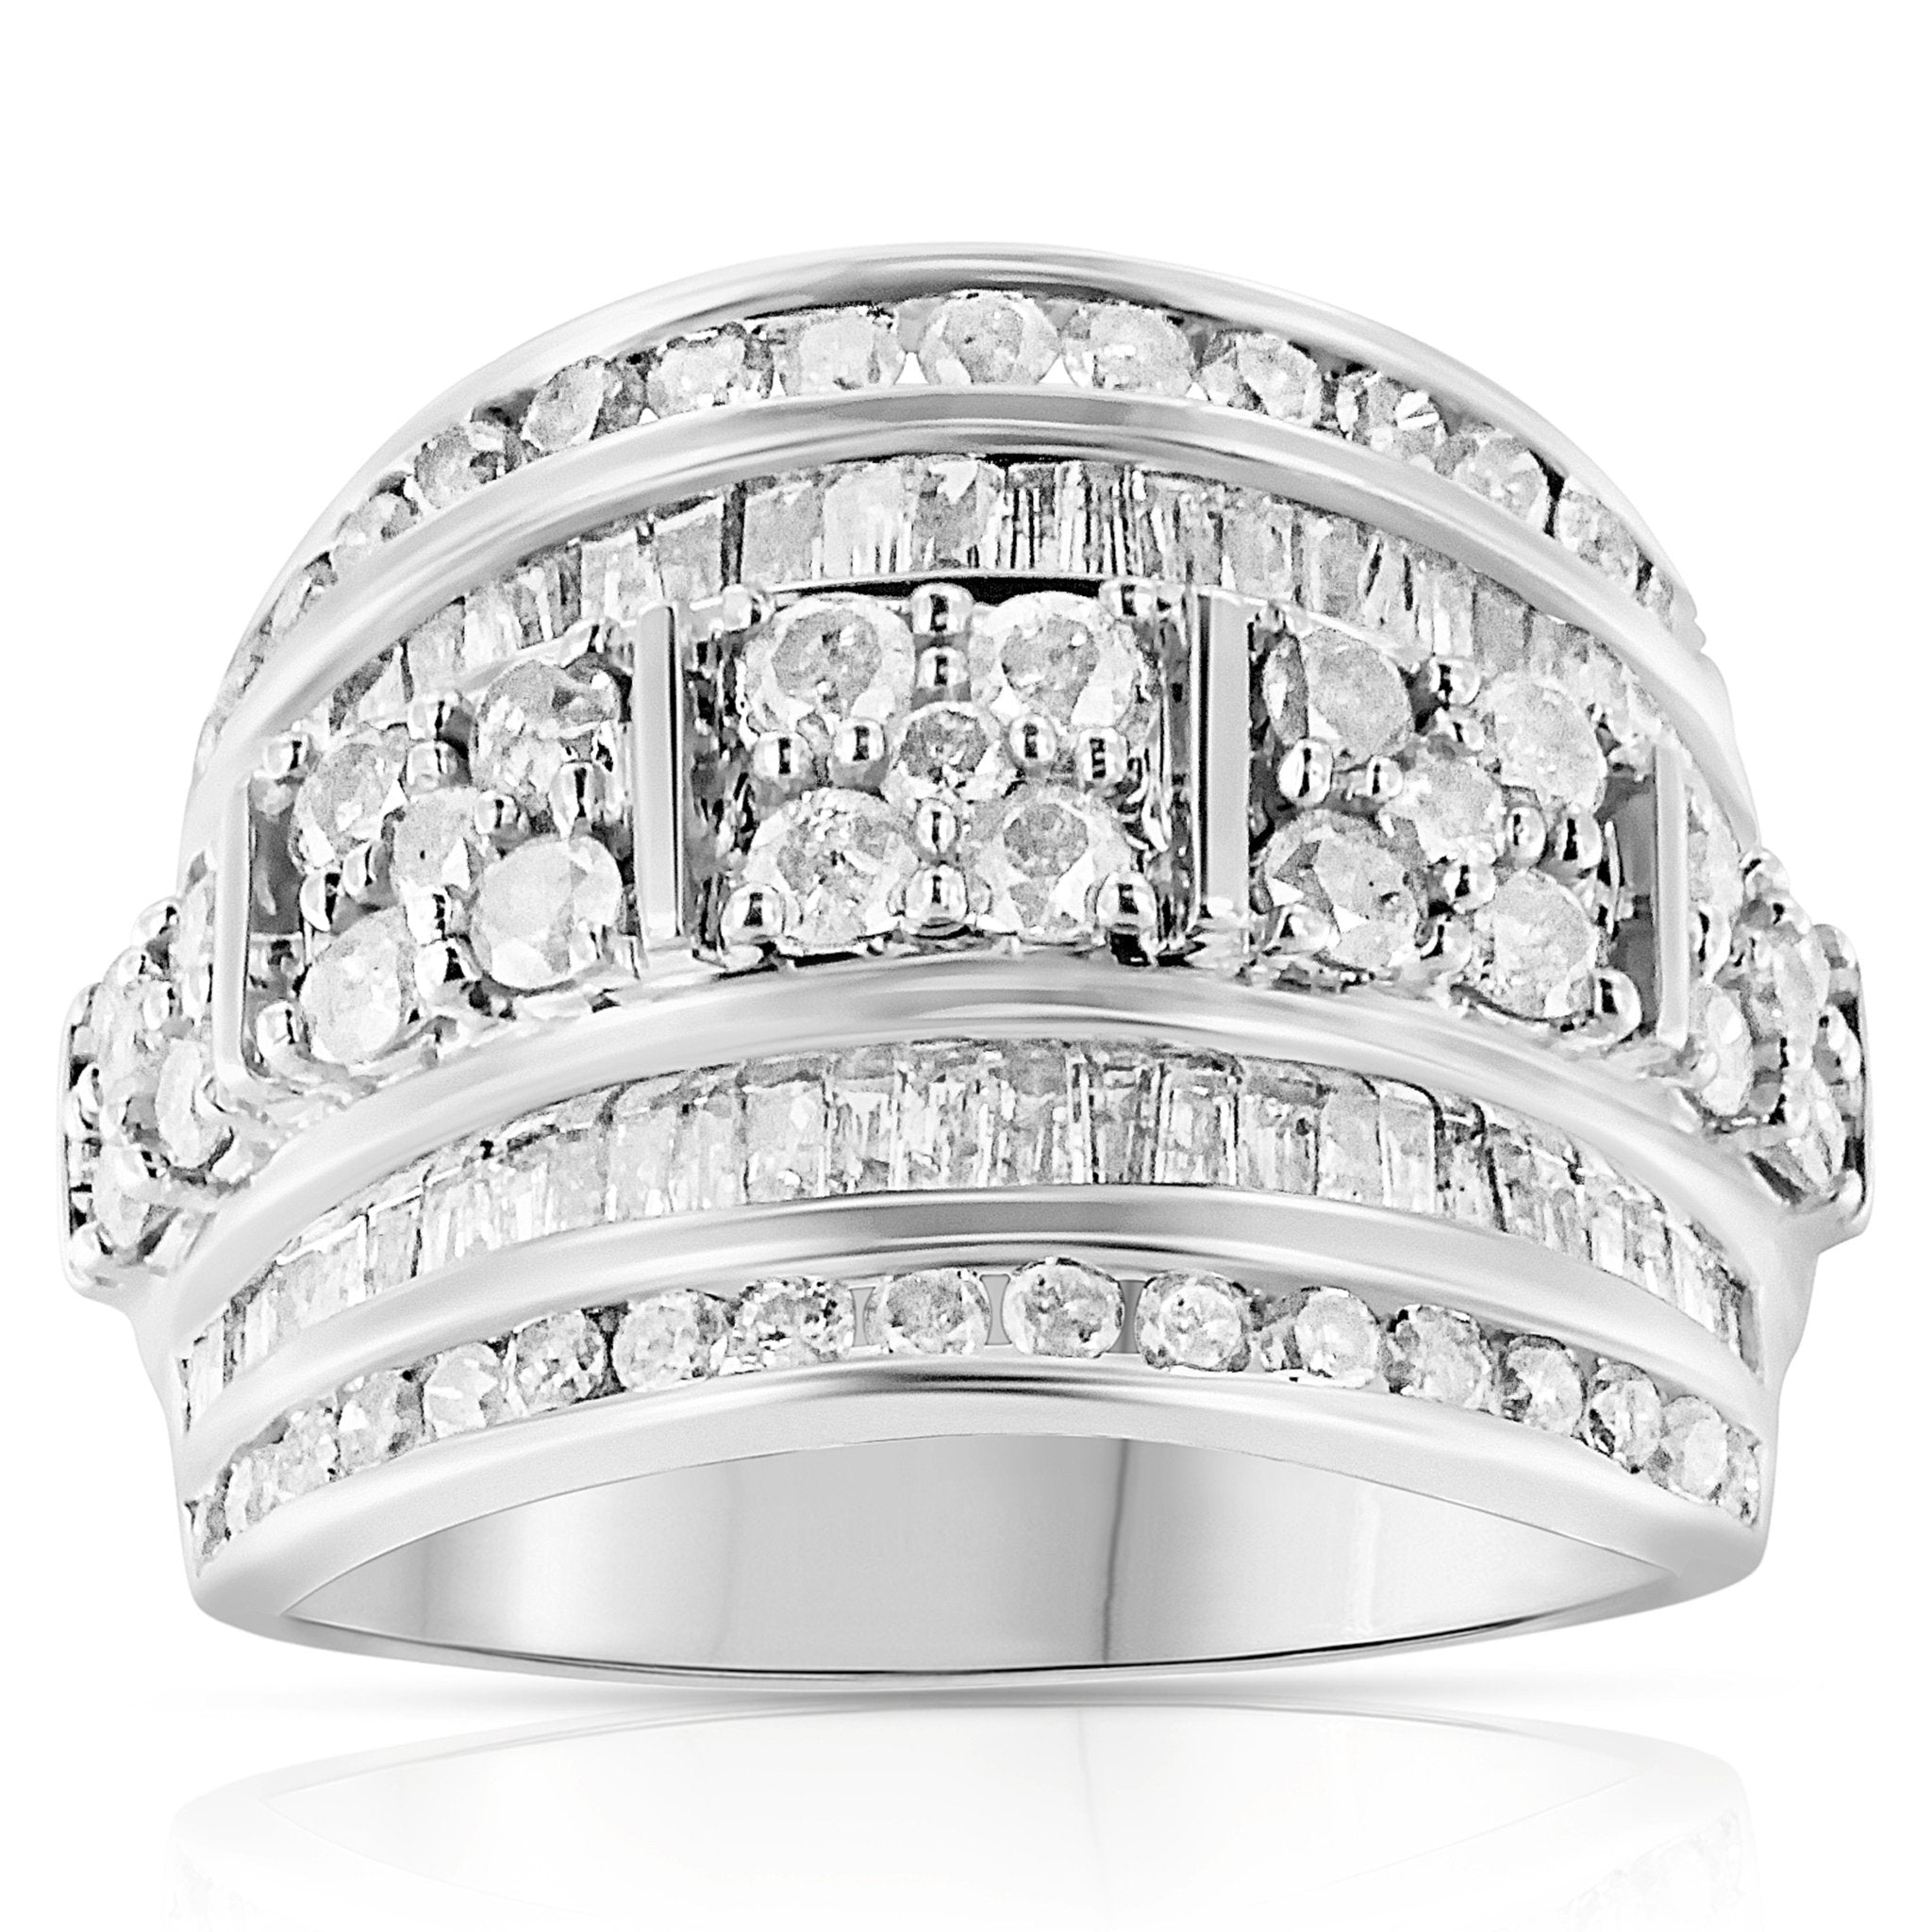 .925-Sterling-Silver-2.0-Cttw-Round-&-Baguette-Cut-Diamond-Multi-Row-Channel-Set-Tapered-Cocktail-Fashion-Ring-(I-J-Color,-I3-Clarity)-Size-7-Rings